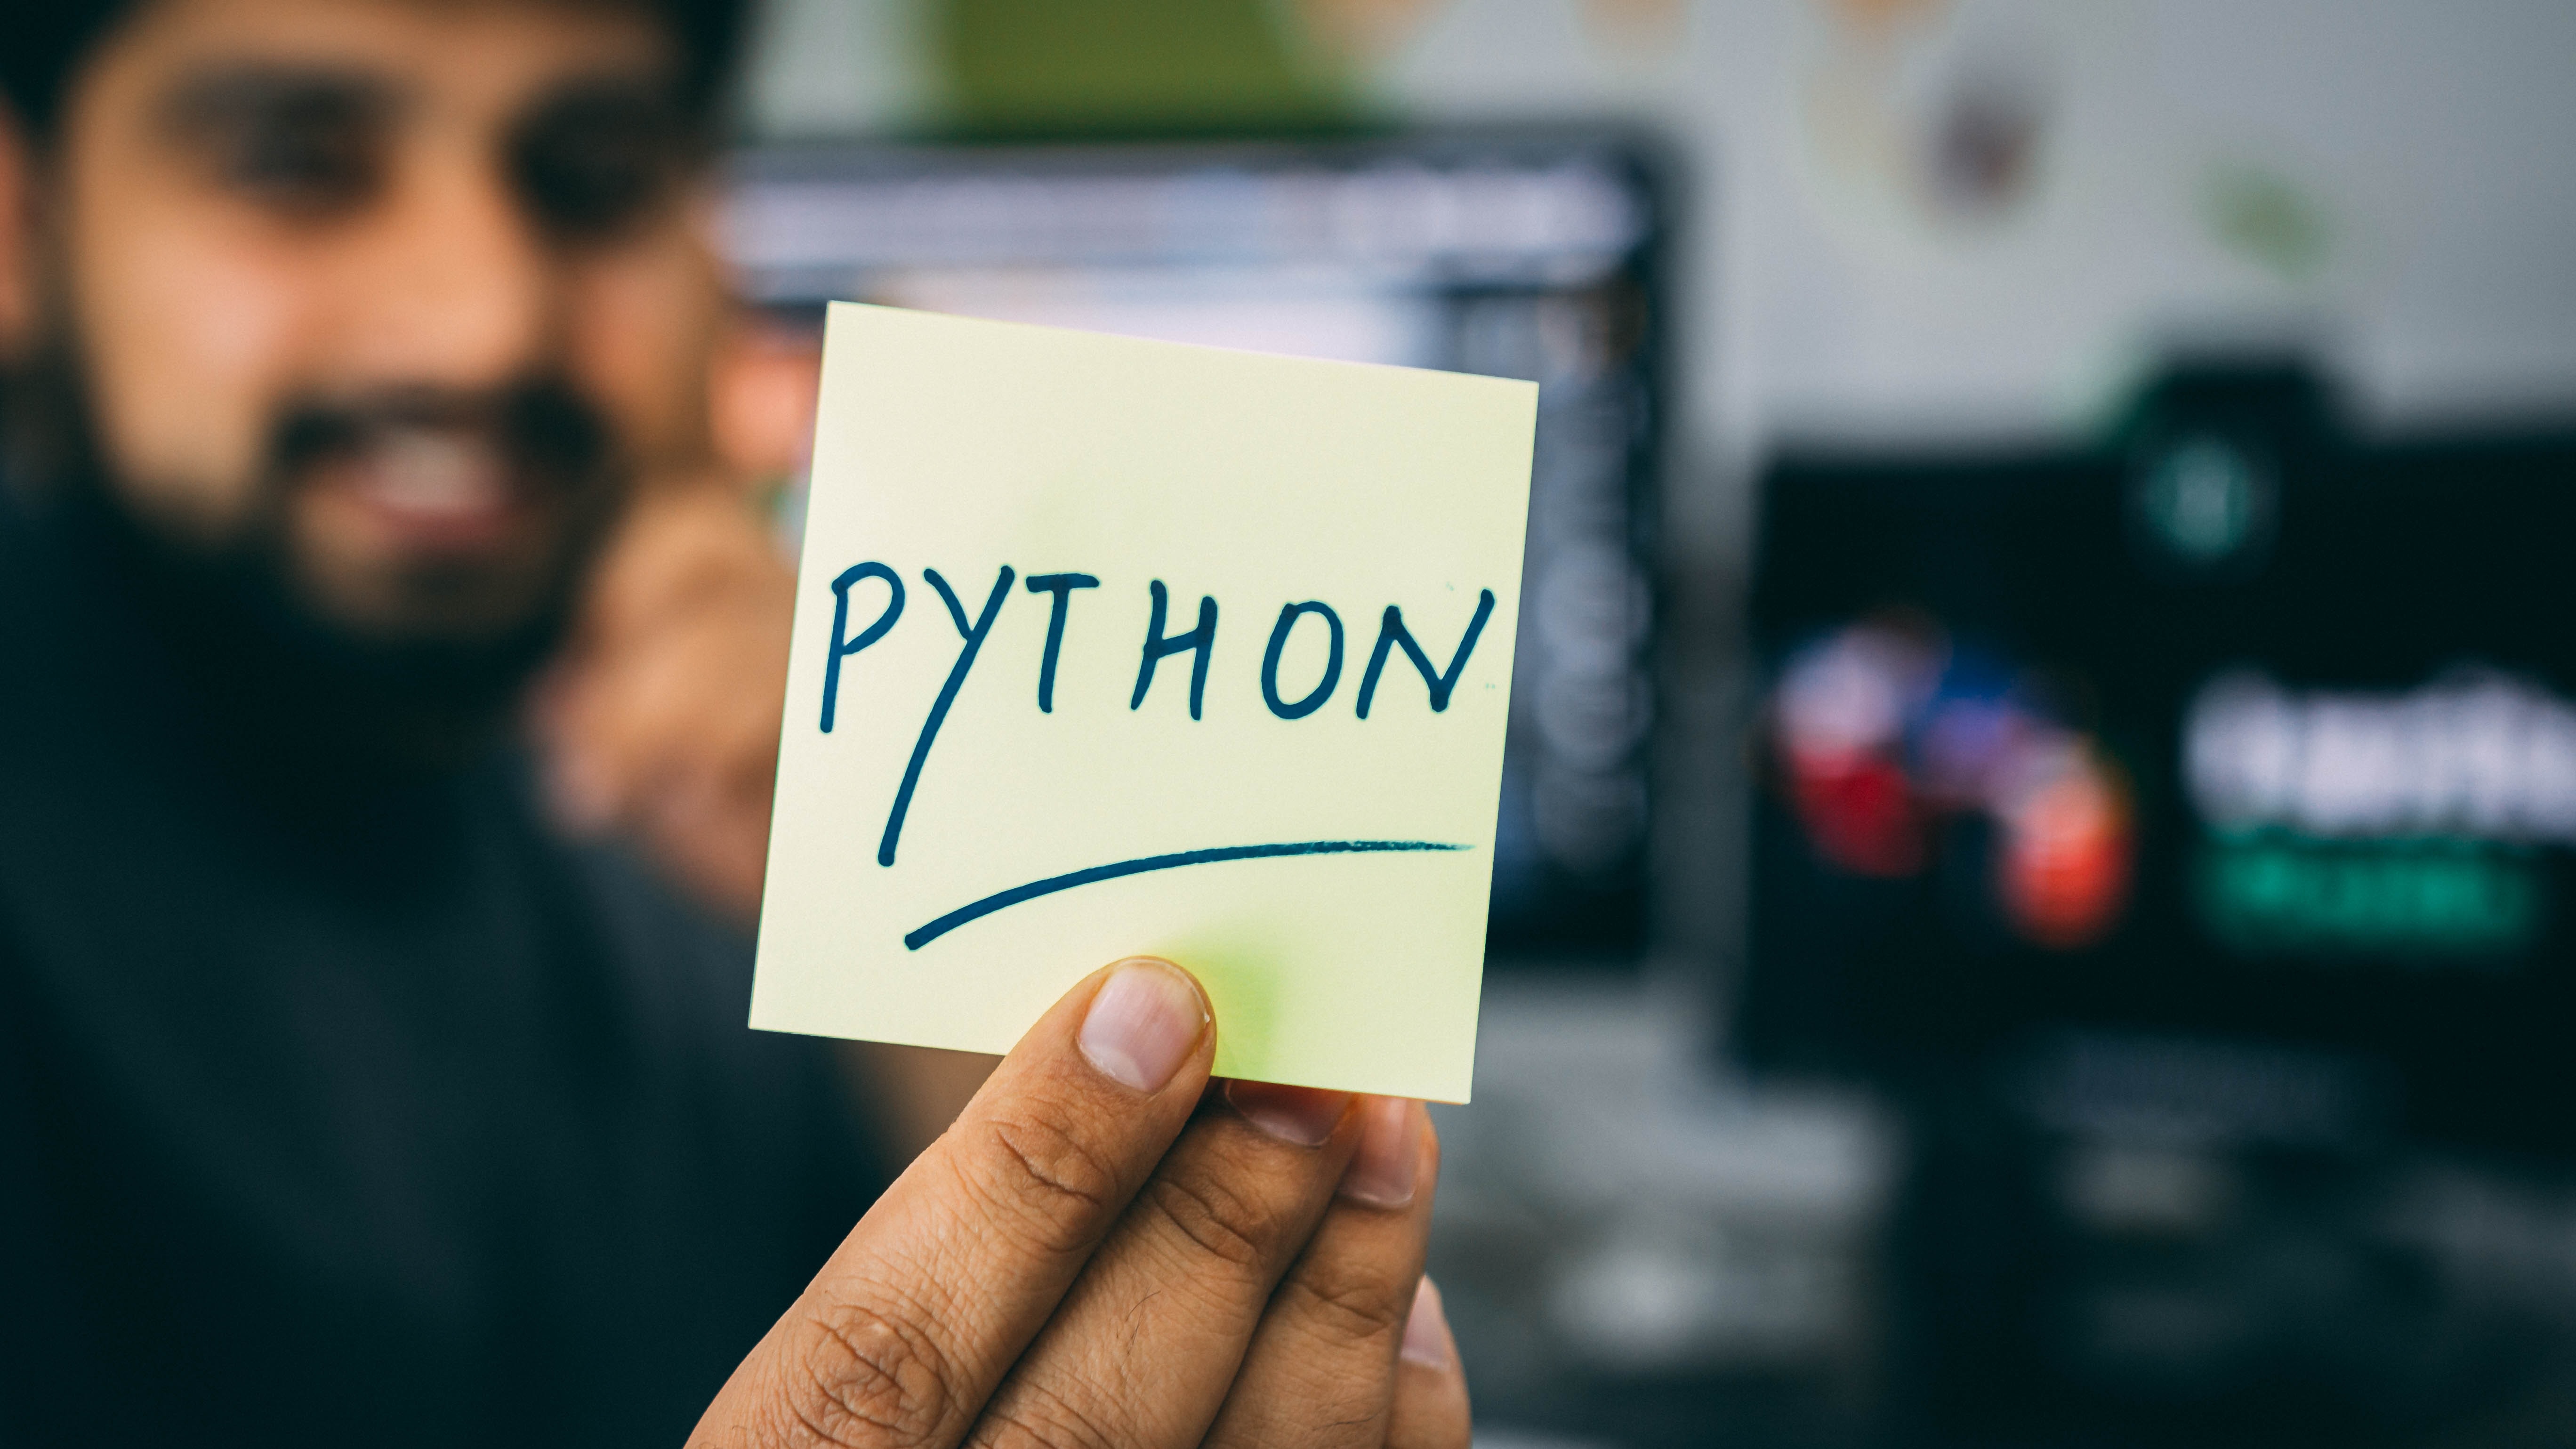 Python is a main Programming Language use in the Data Industry